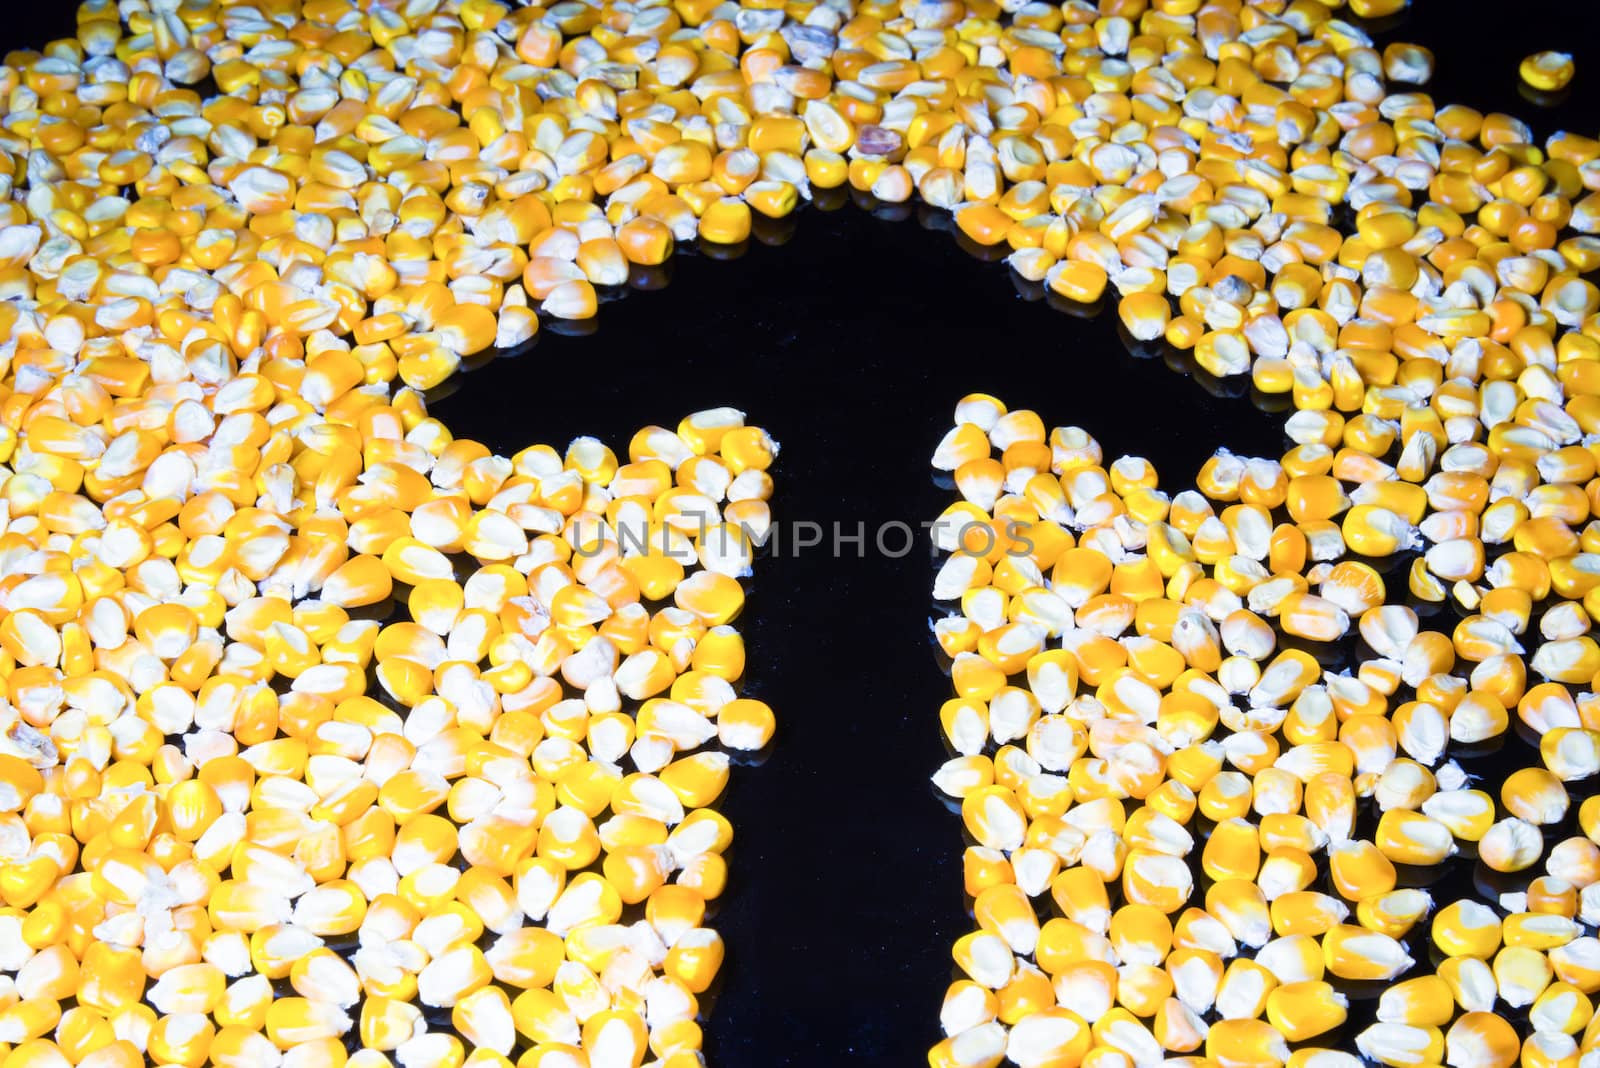 Seed corn to an arrow on a black background. by wmitrmatr